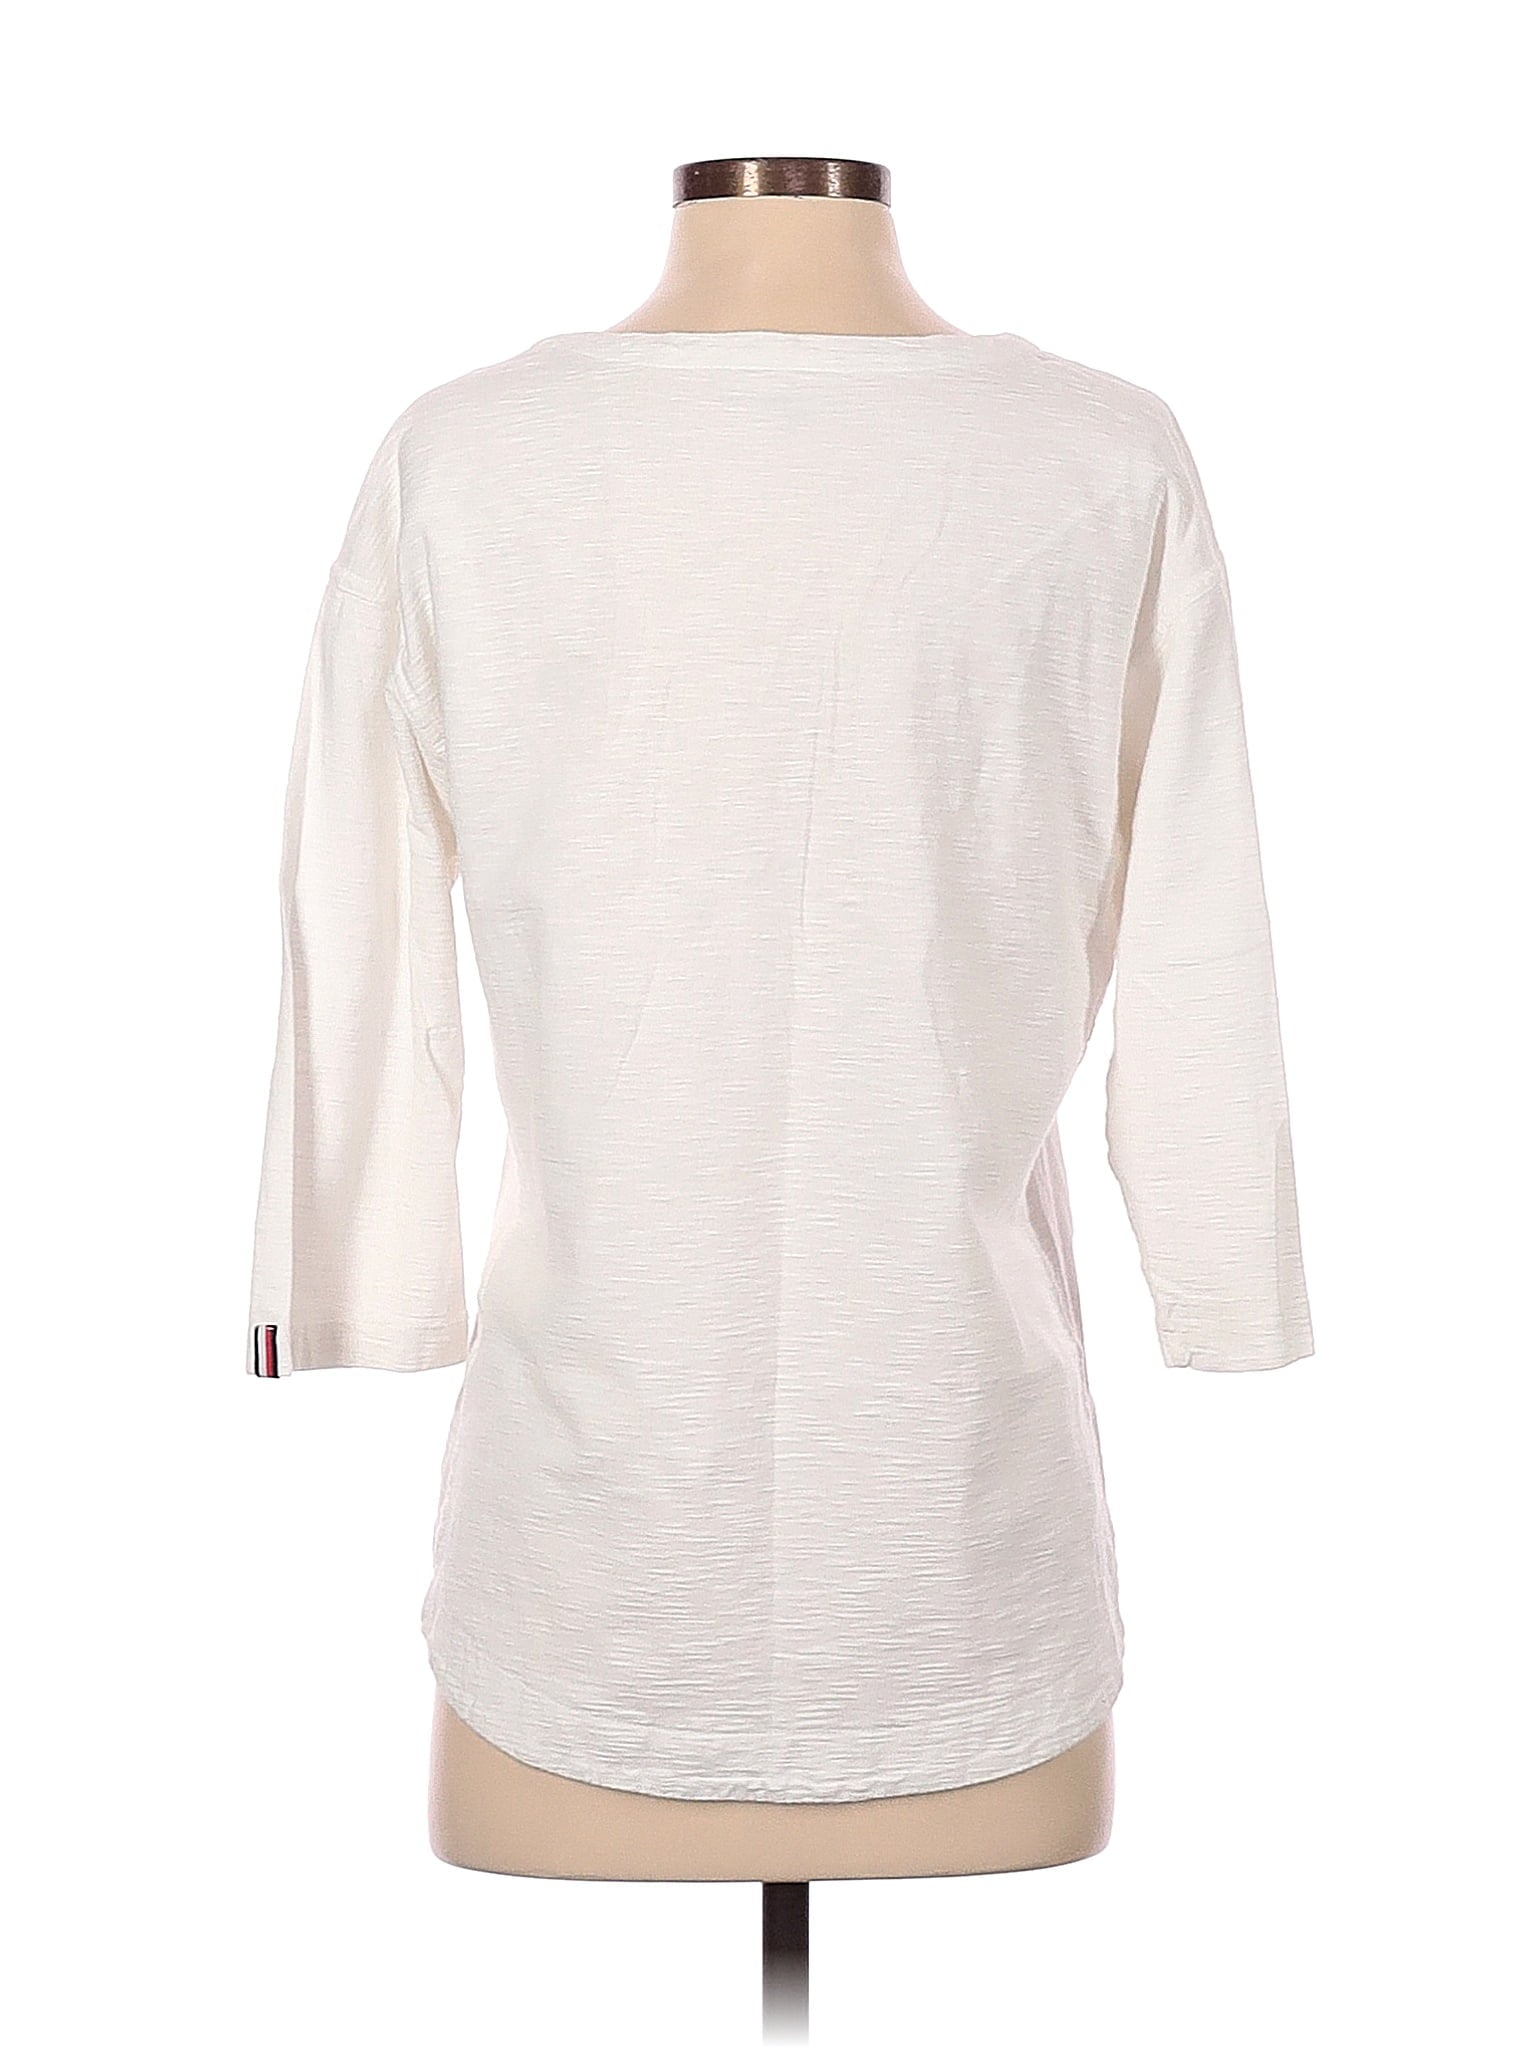 3/4 Sleeve Top size - S